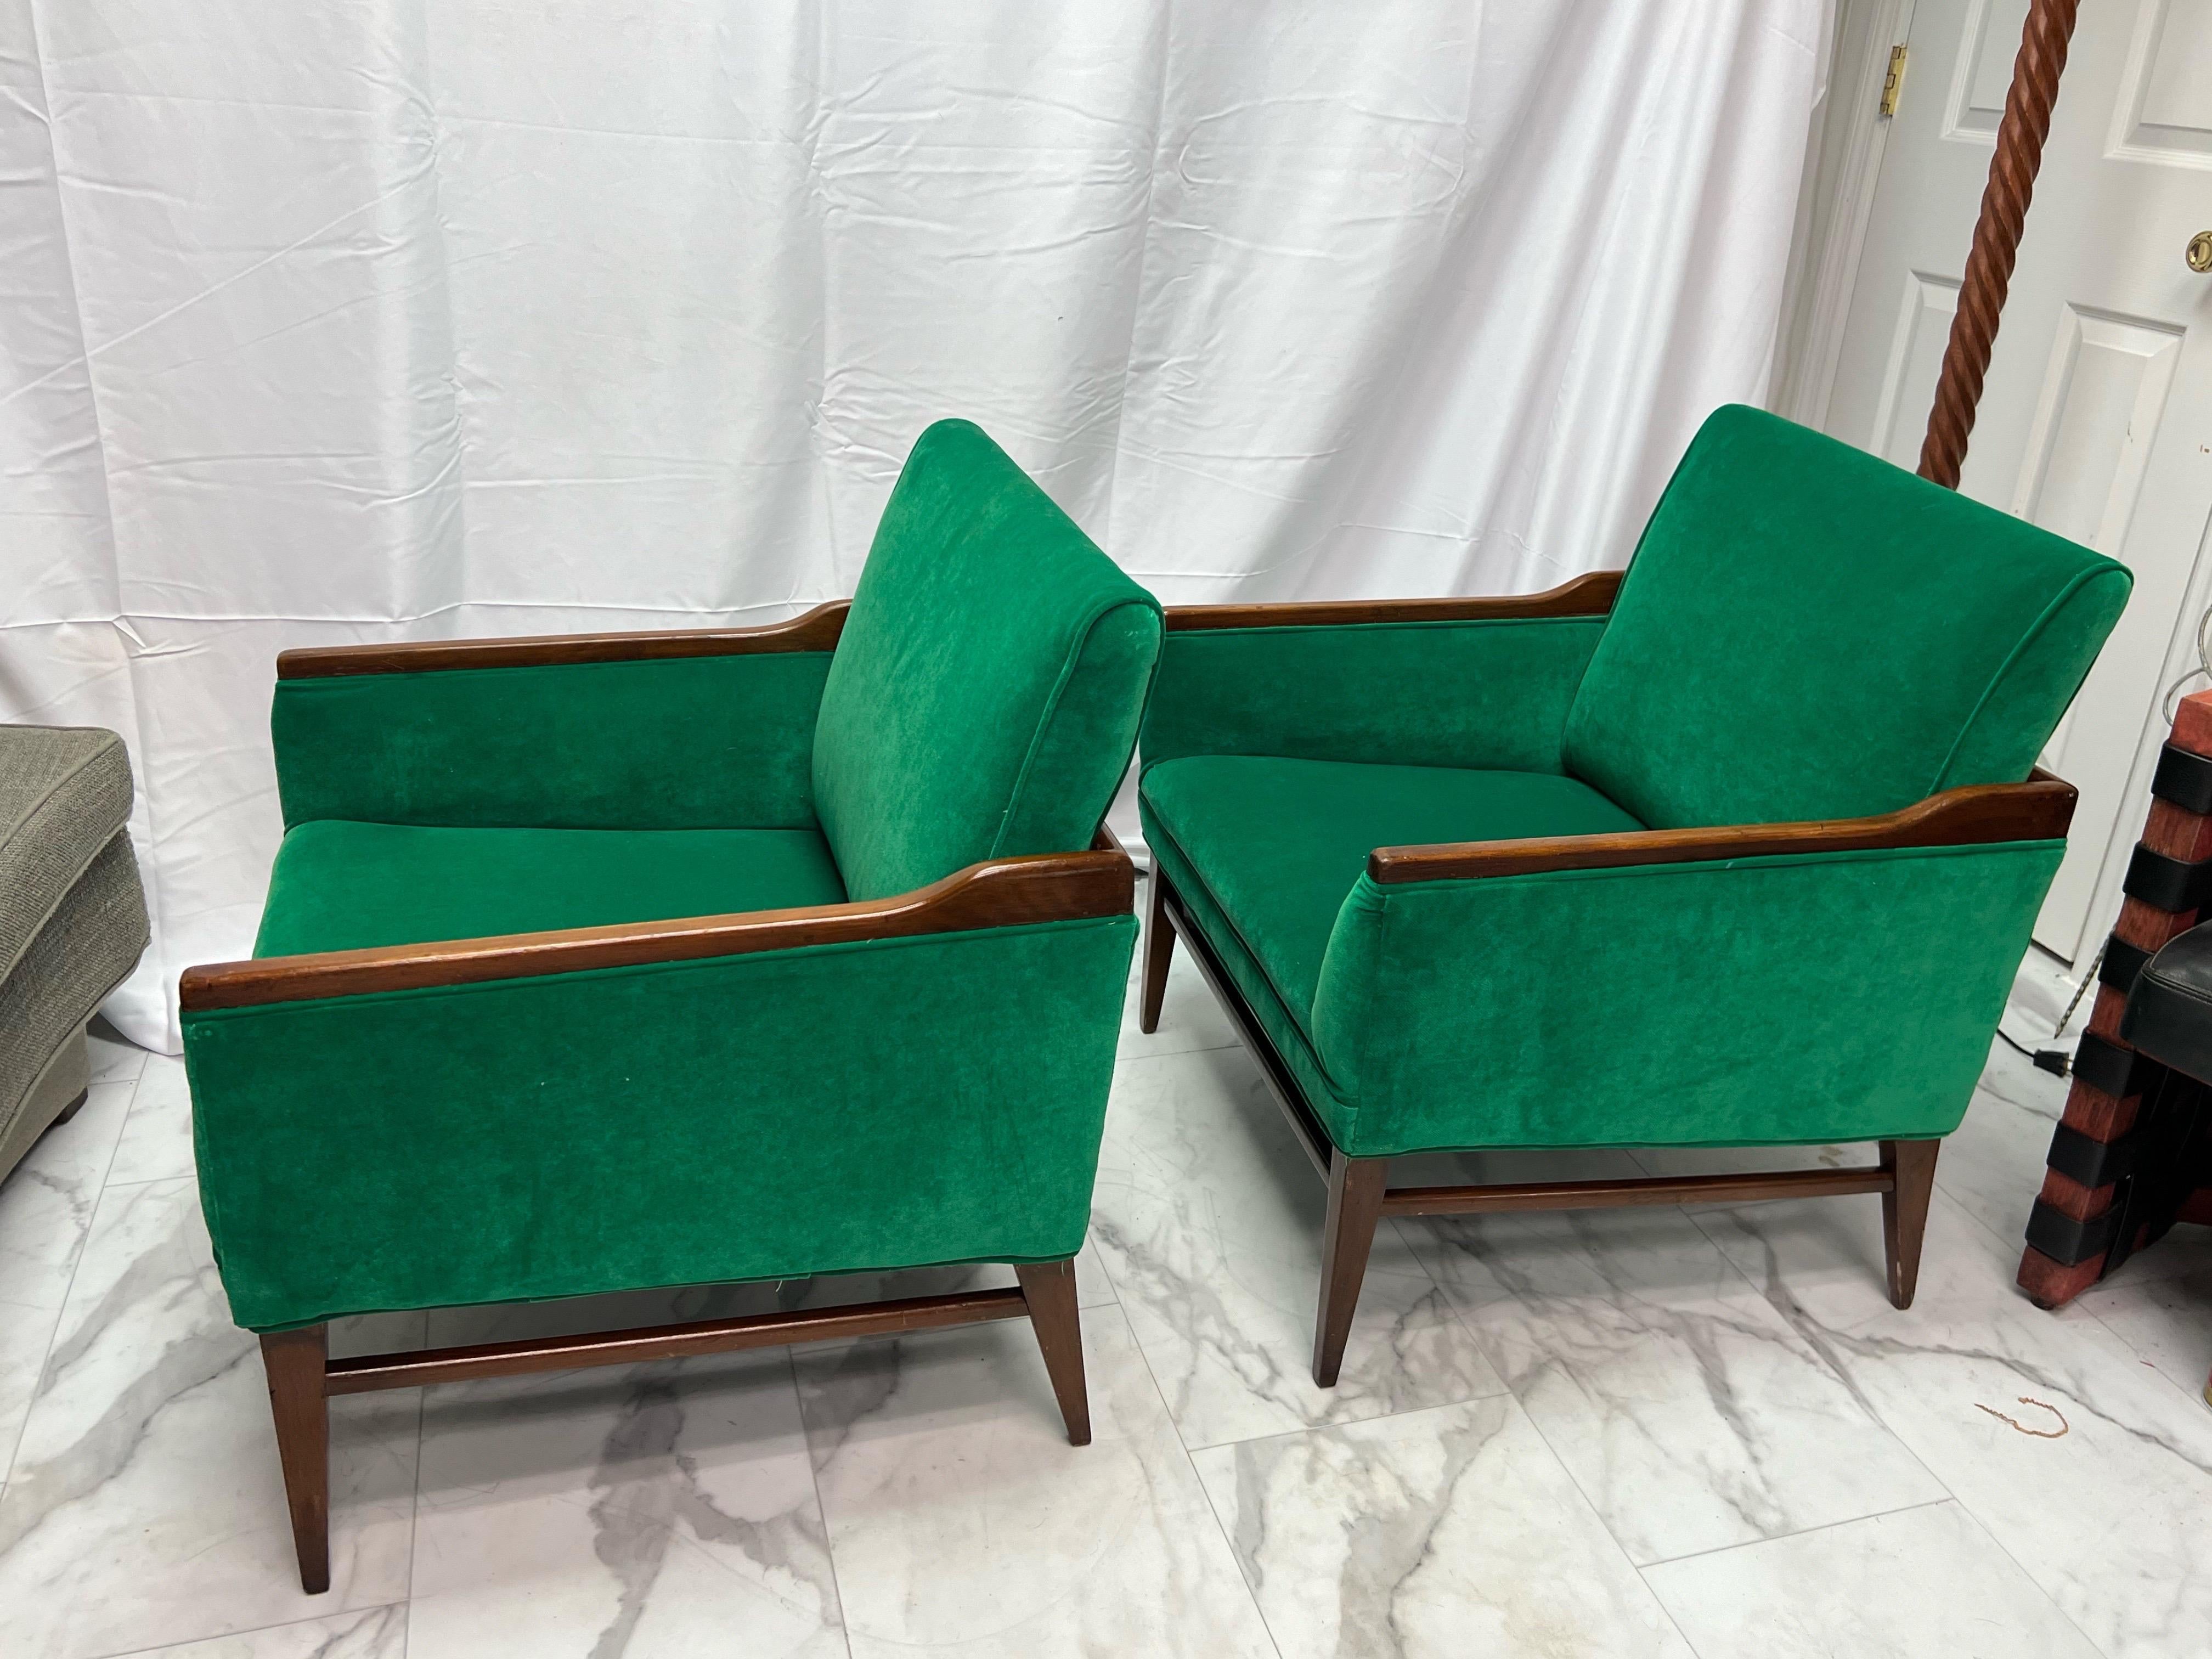 1950’s Walnut and Green Velvet Low Profile Chairs - a Pair For Sale 6